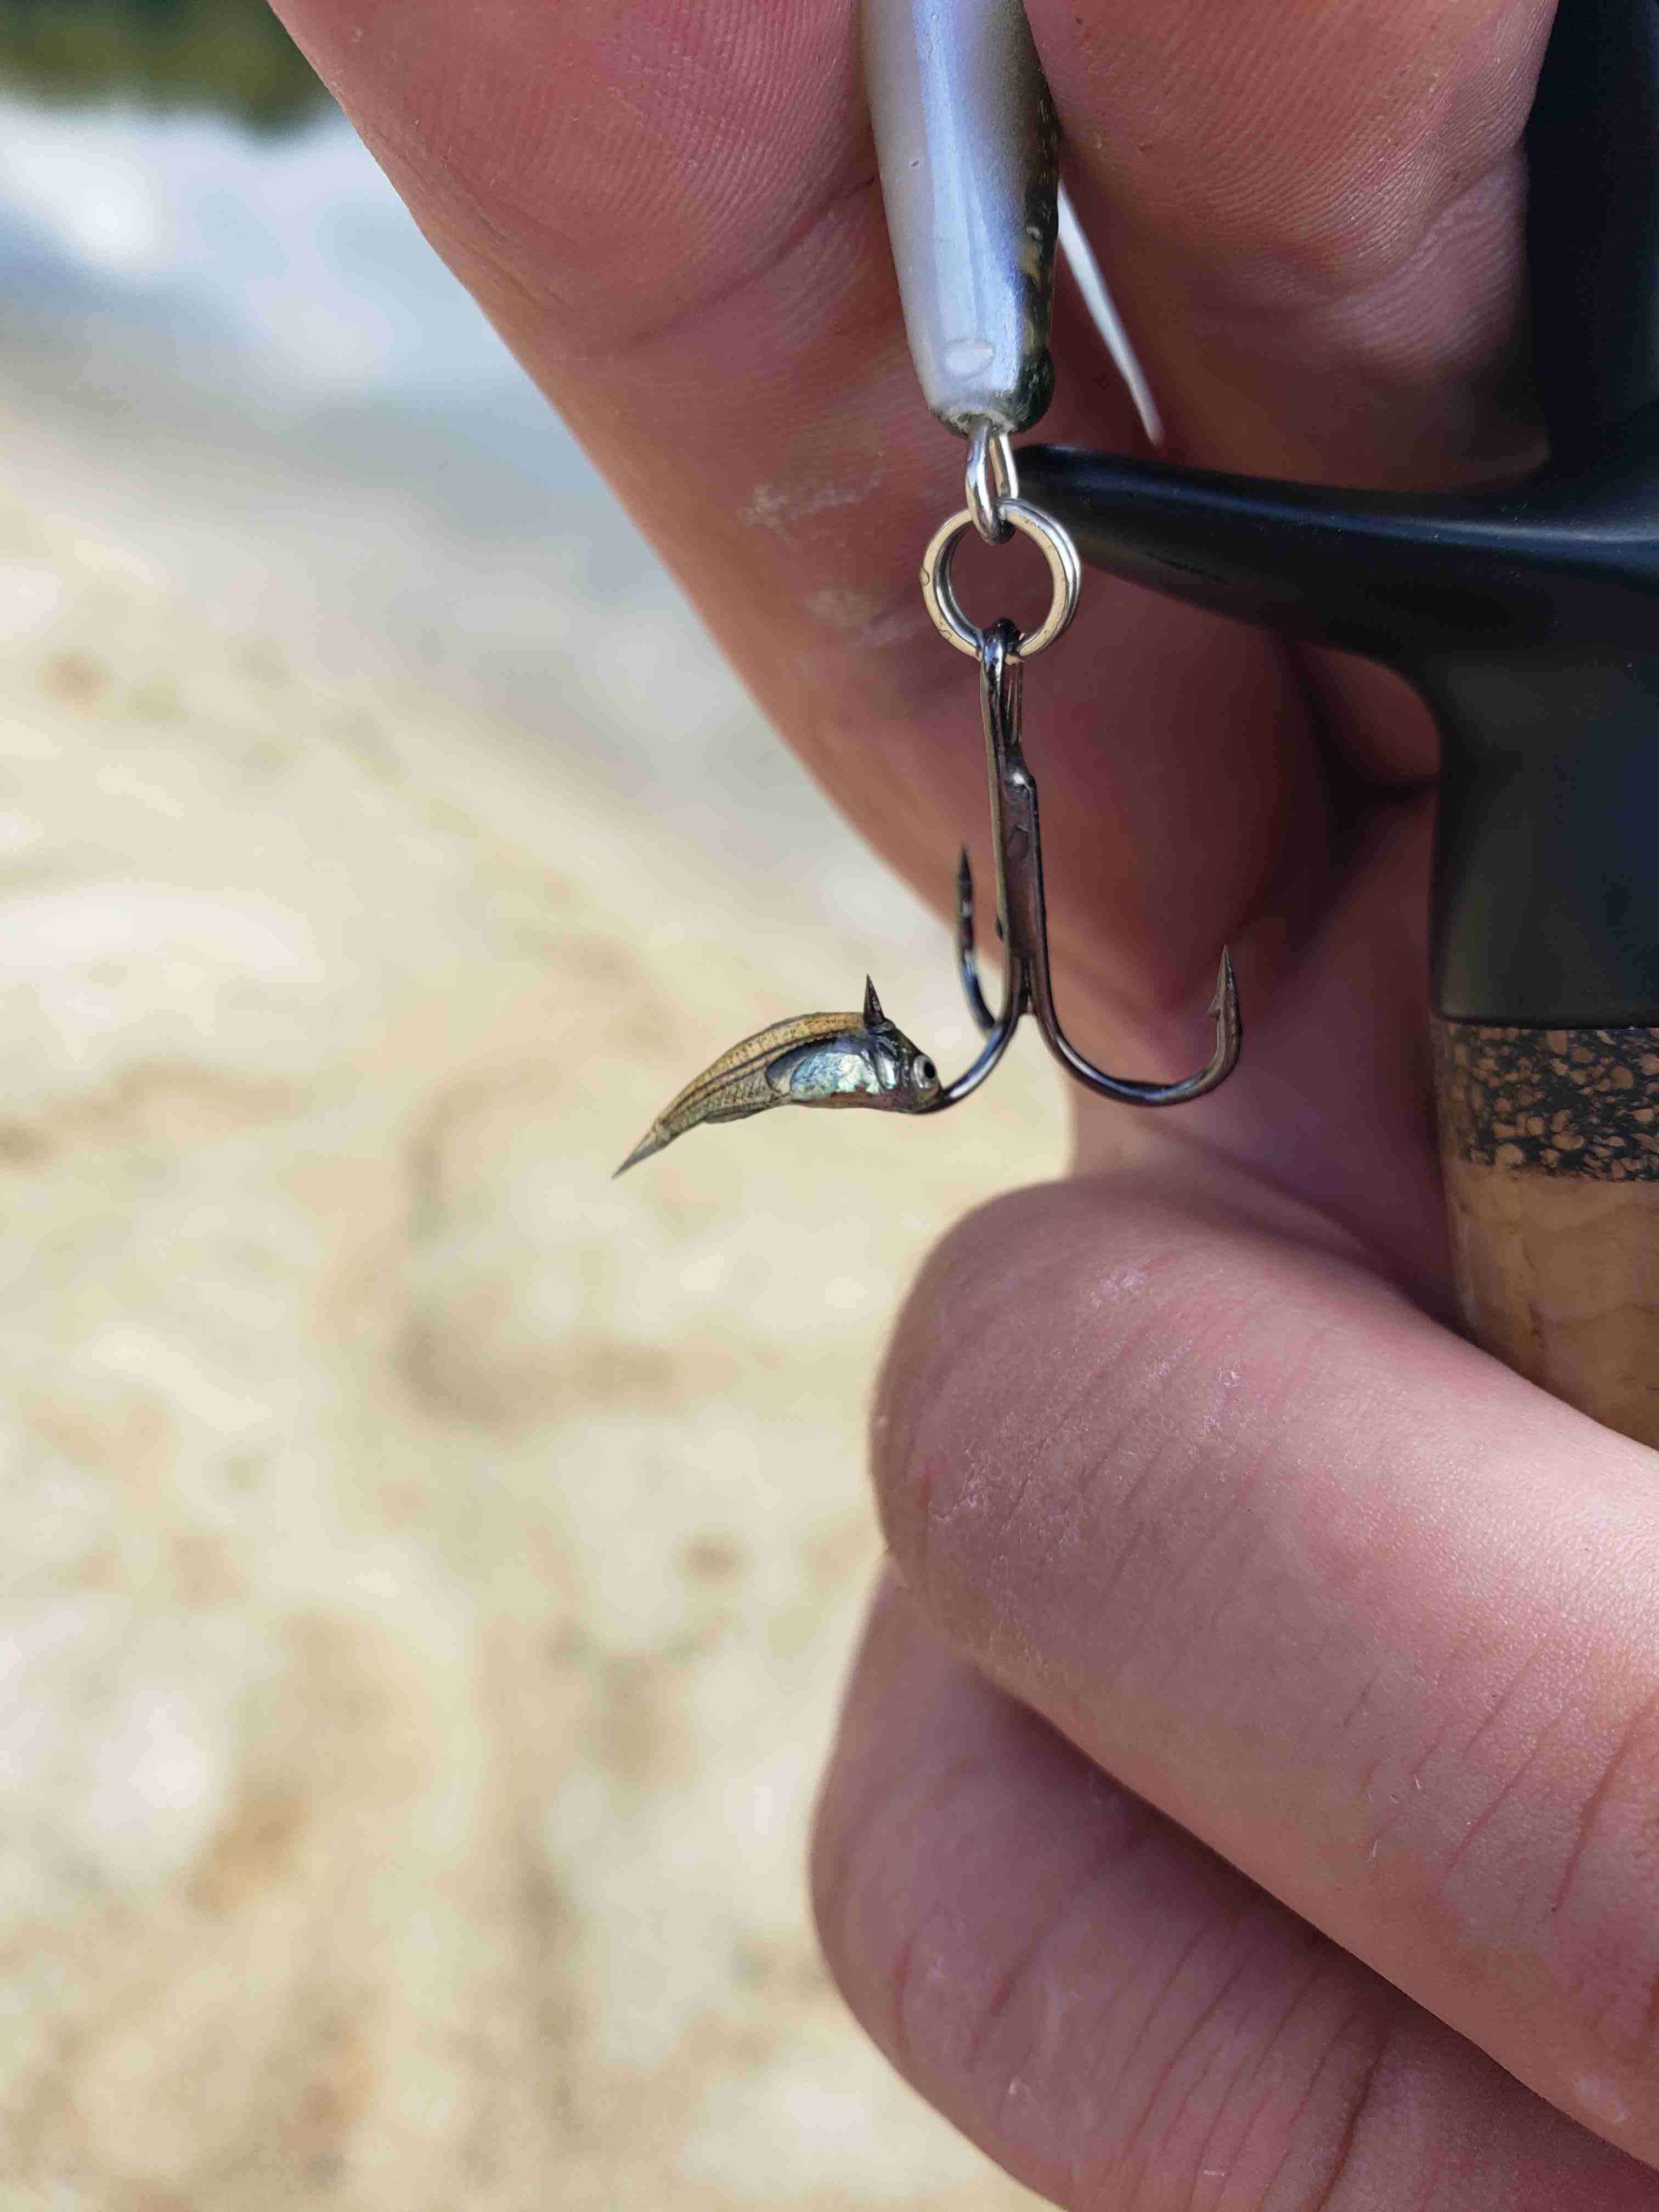 Are VMC hooks sharp? - Fishing Tackle - Bass Fishing Forums